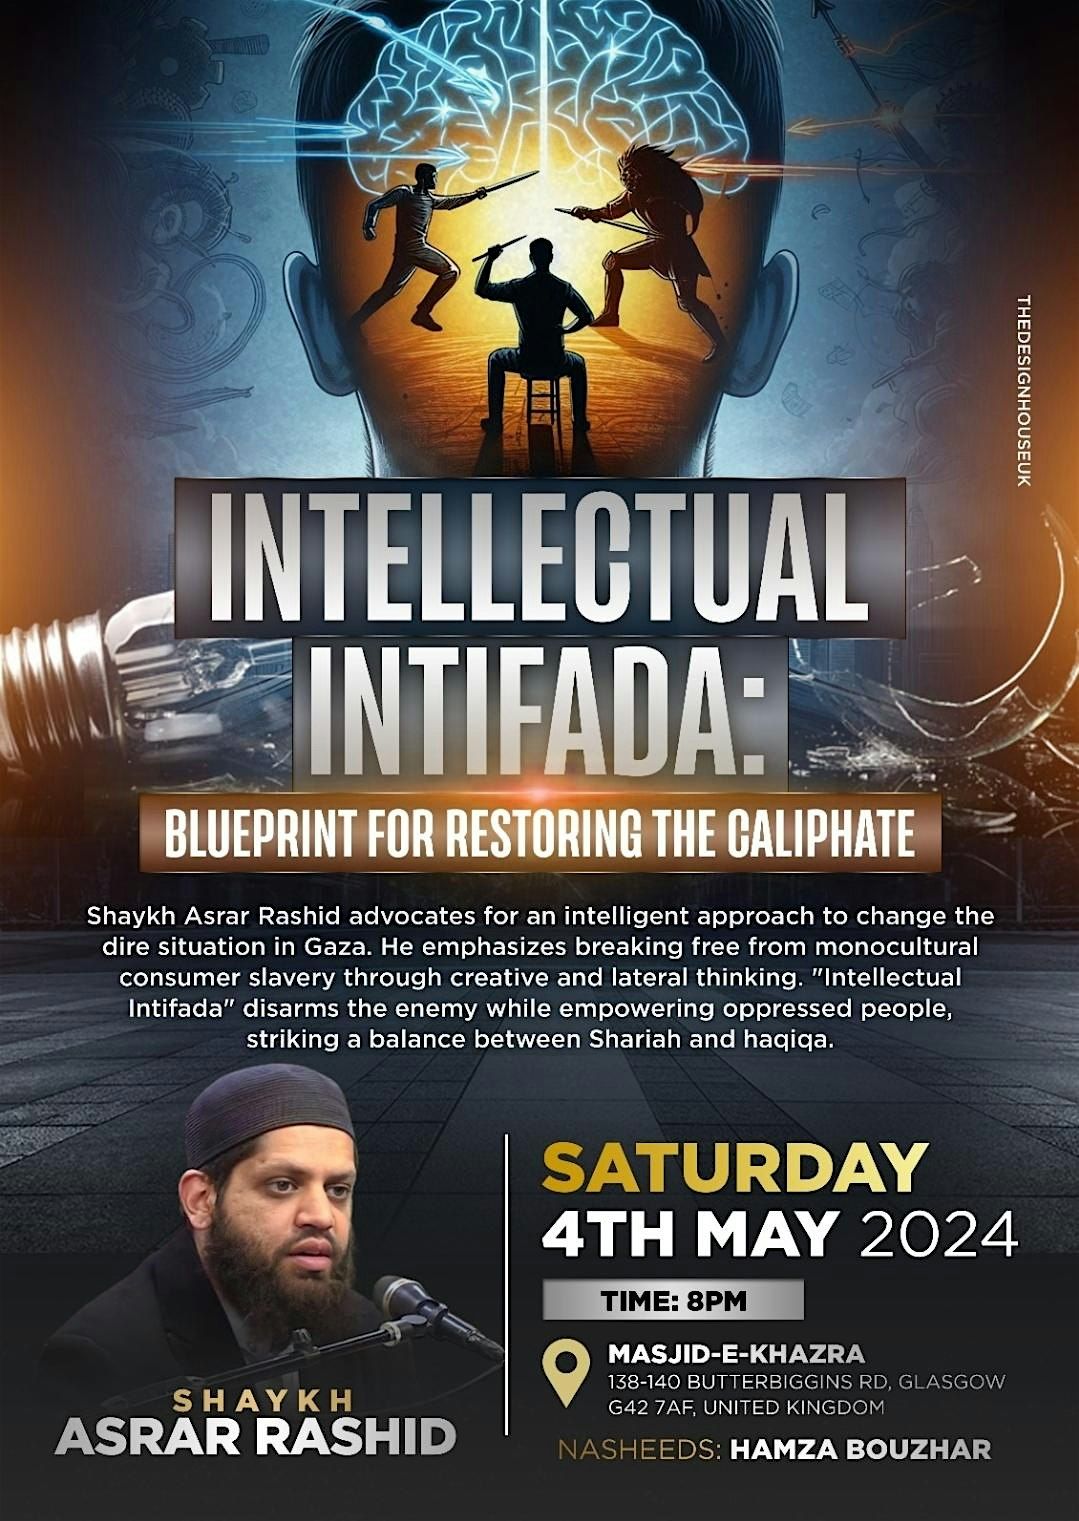 Intellectual Intifada: Blueprint for Restoring the Caliphate